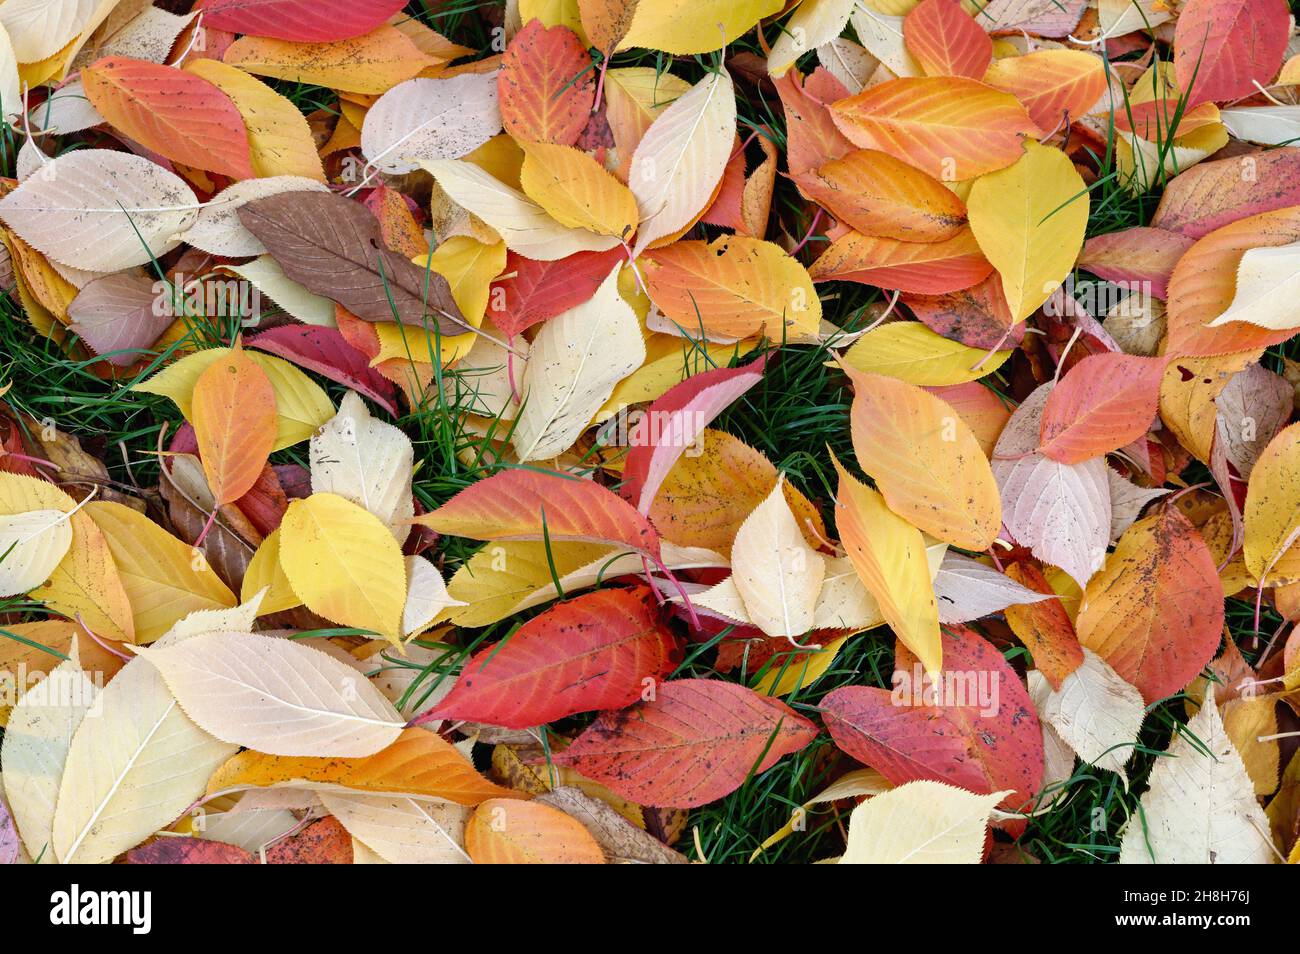 Close up of the colourful fallen autumn leaves of the flowering cherry tree, Prunus creating an abstract pattern Stock Photo